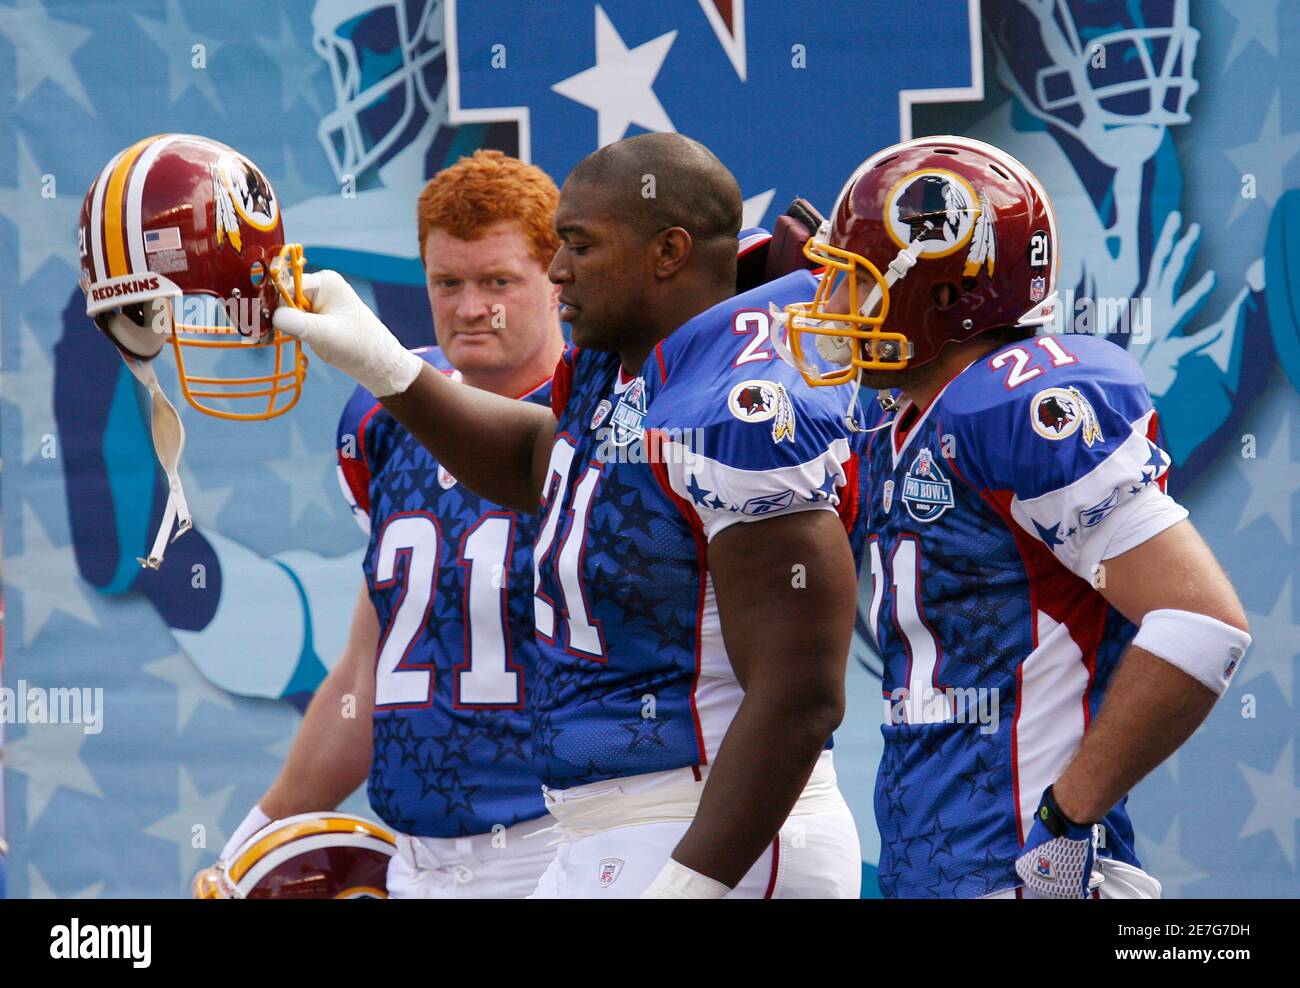 NFC Washington Redskins players (L-R) Ethan Albright, Chris Cooley Chris wear the #21 jersey in memory of slain Redskins player Sean Taylor during the NFL Bowl at Aloha Stadium